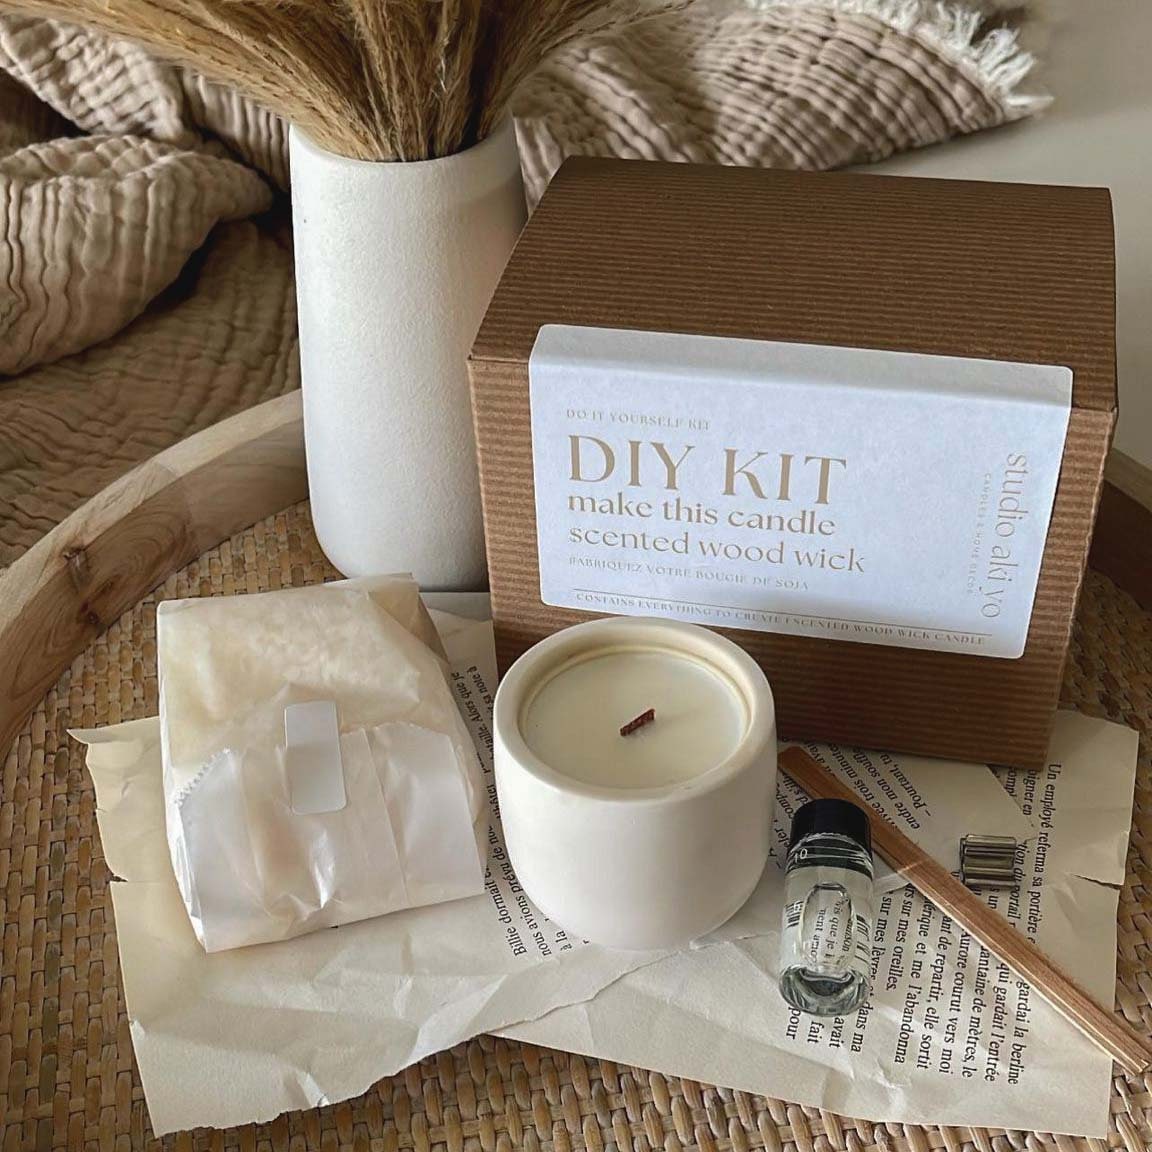 DIY Butter Candle Bundle Kit, Create Fun and Delicious Artisanal